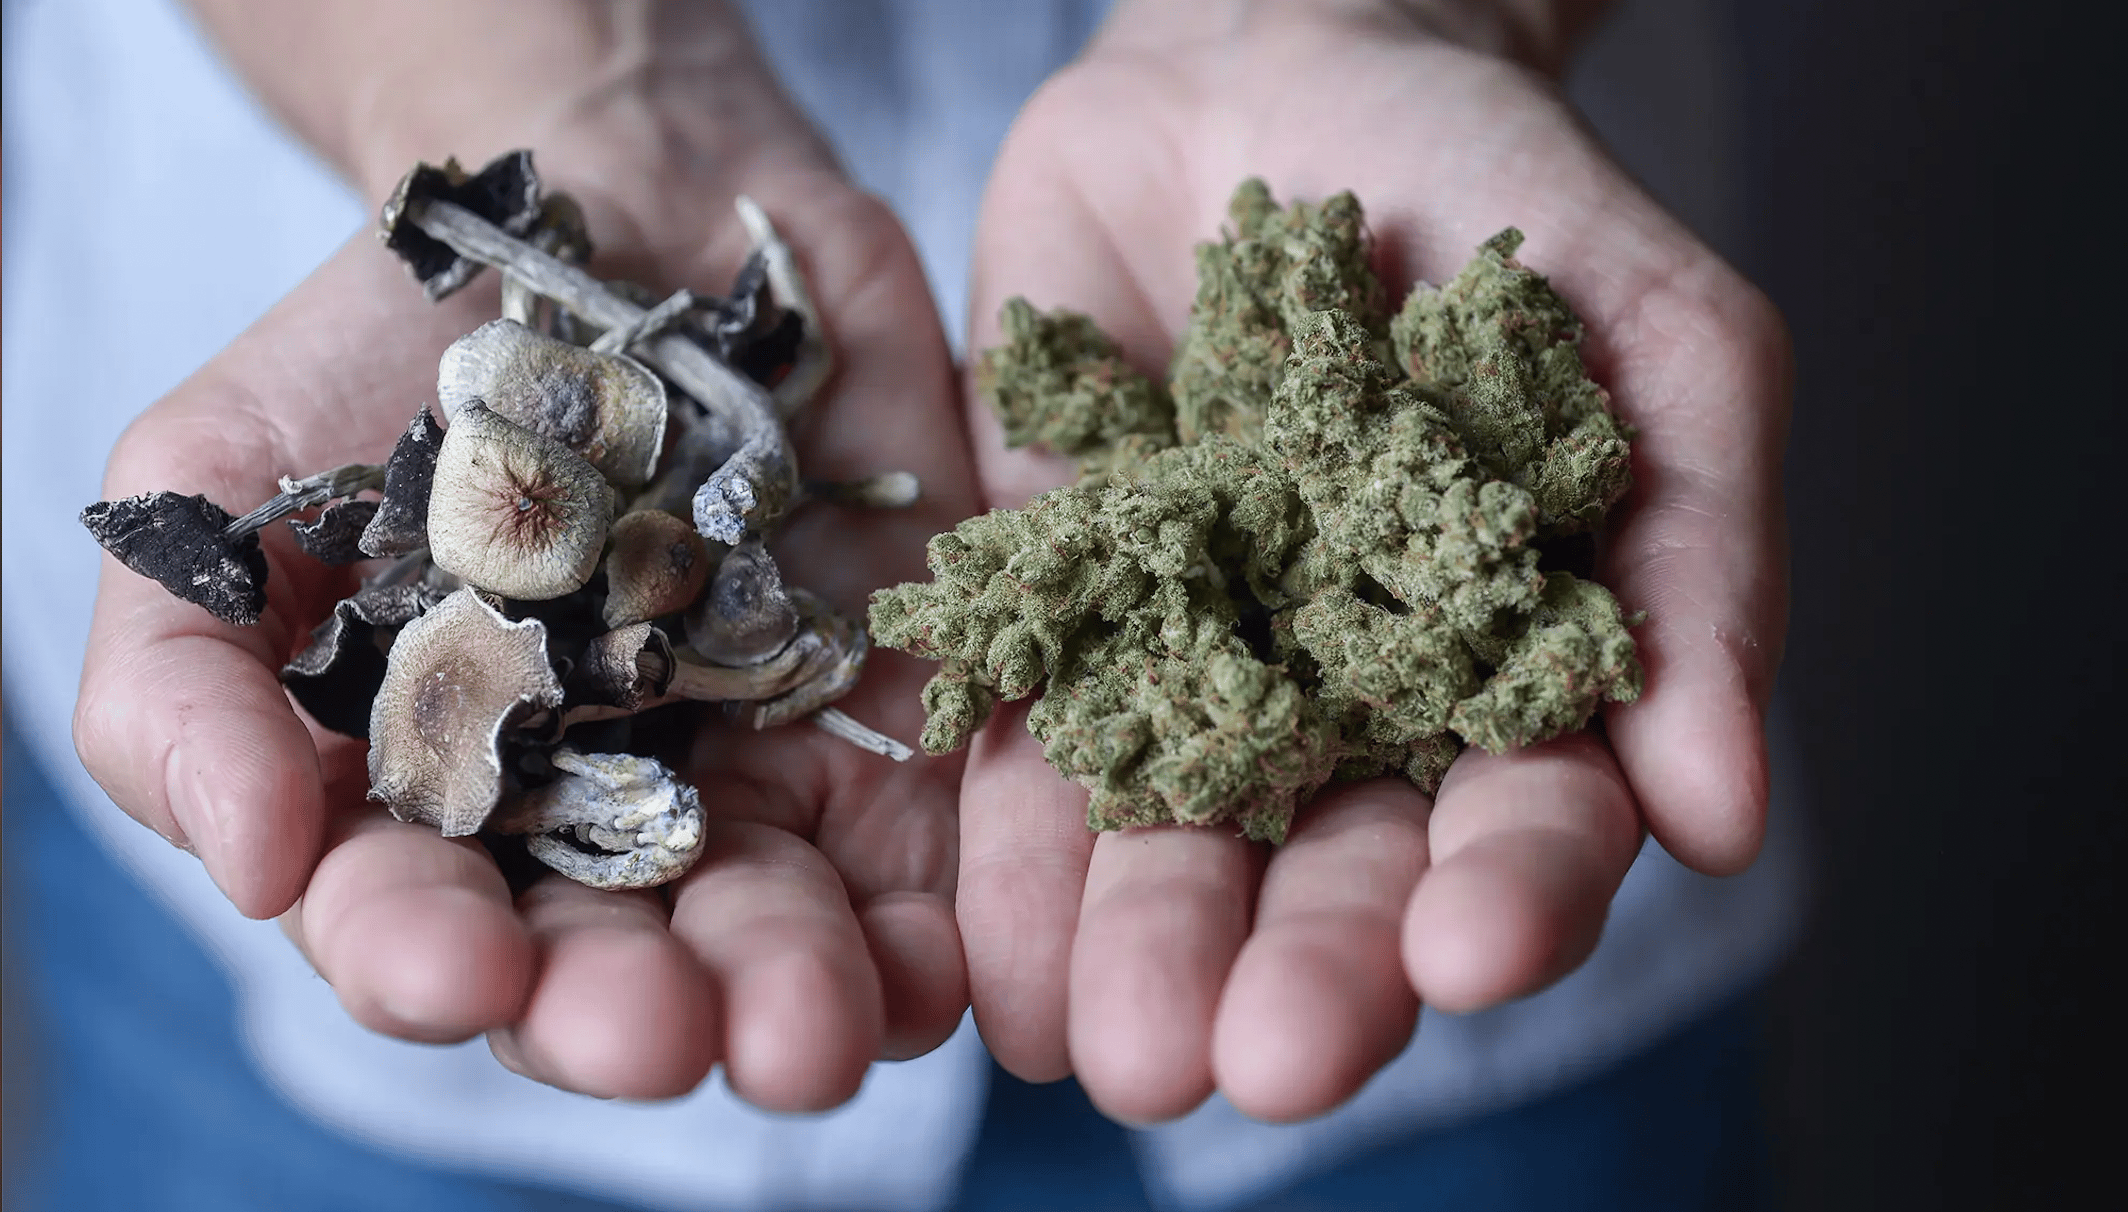 The Difference Between Weed And Shrooms